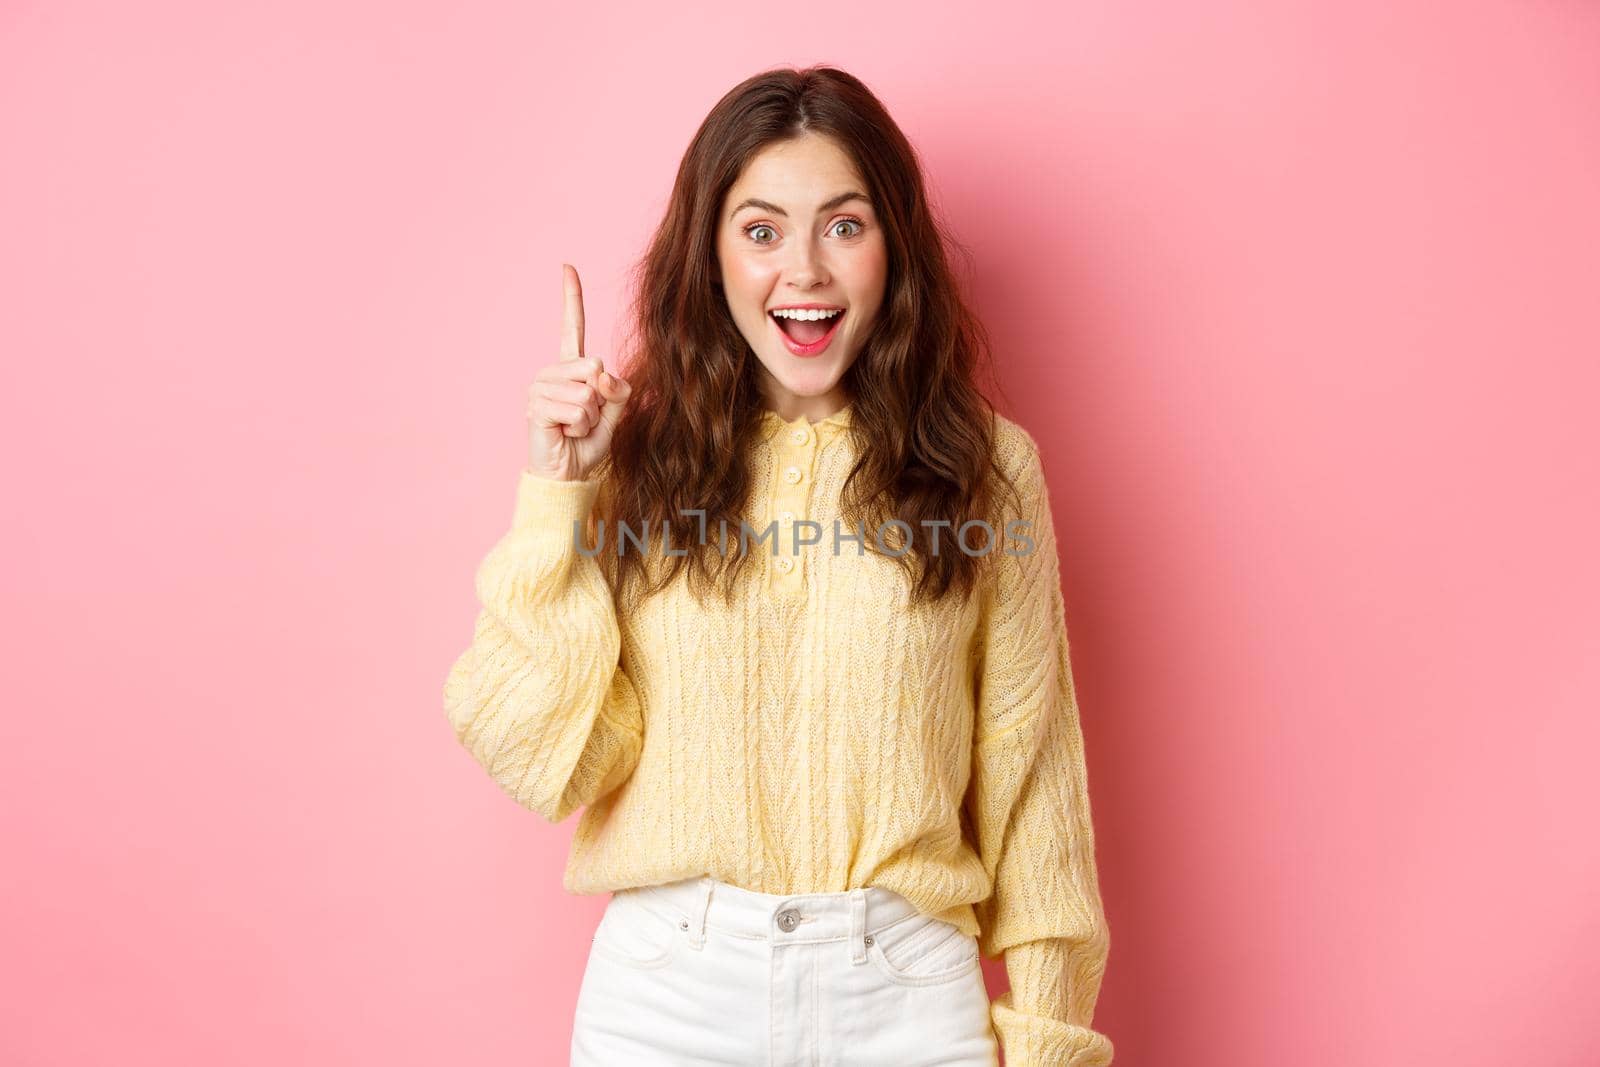 Young excited woman in stylish outfit, raising finger up, pitching an idea, saying suggestion, ahve interesting plan, standing over pink background.